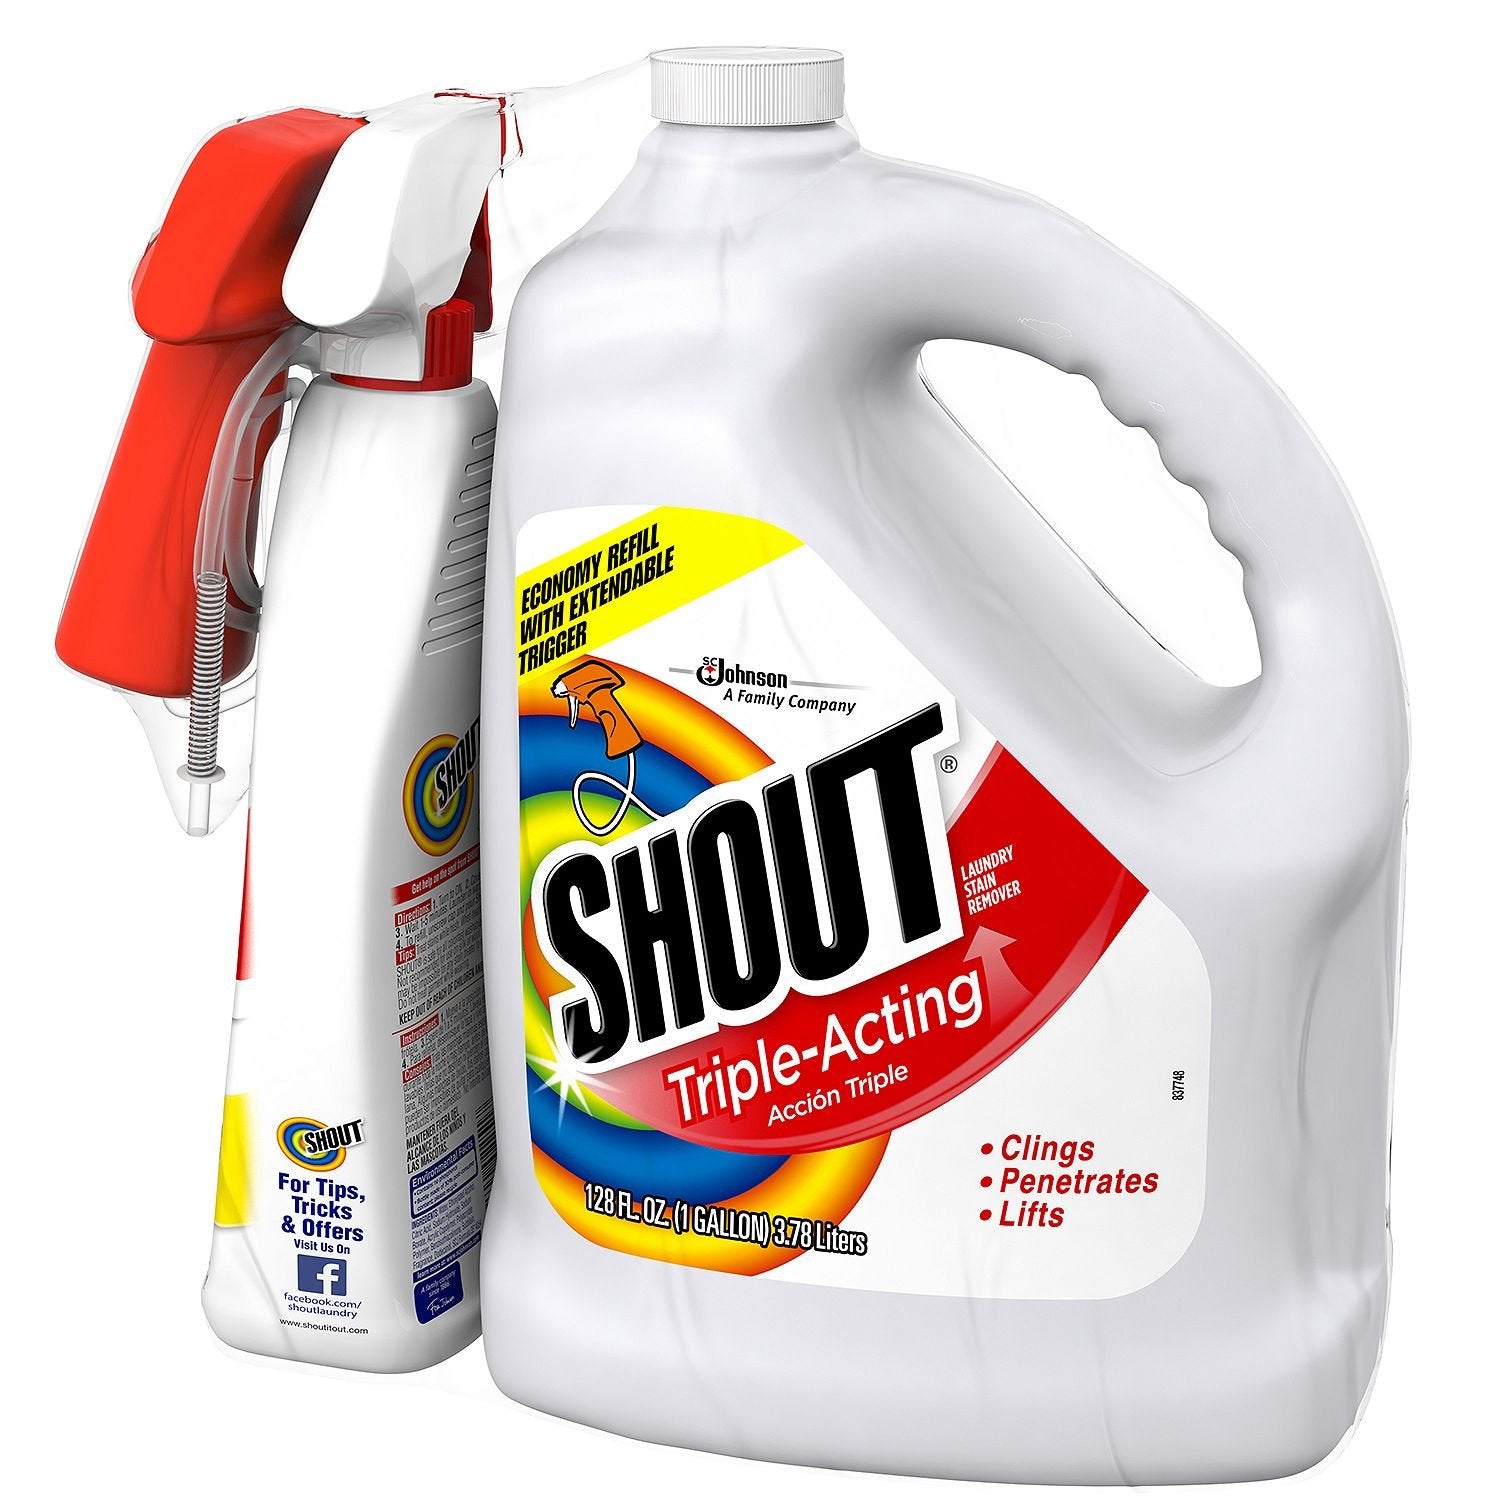 Shout Triple-Acting Laundry Stain Remover for Everyday Stains Liquid Refill, 60 fl oz - Pack of 6  - Like New